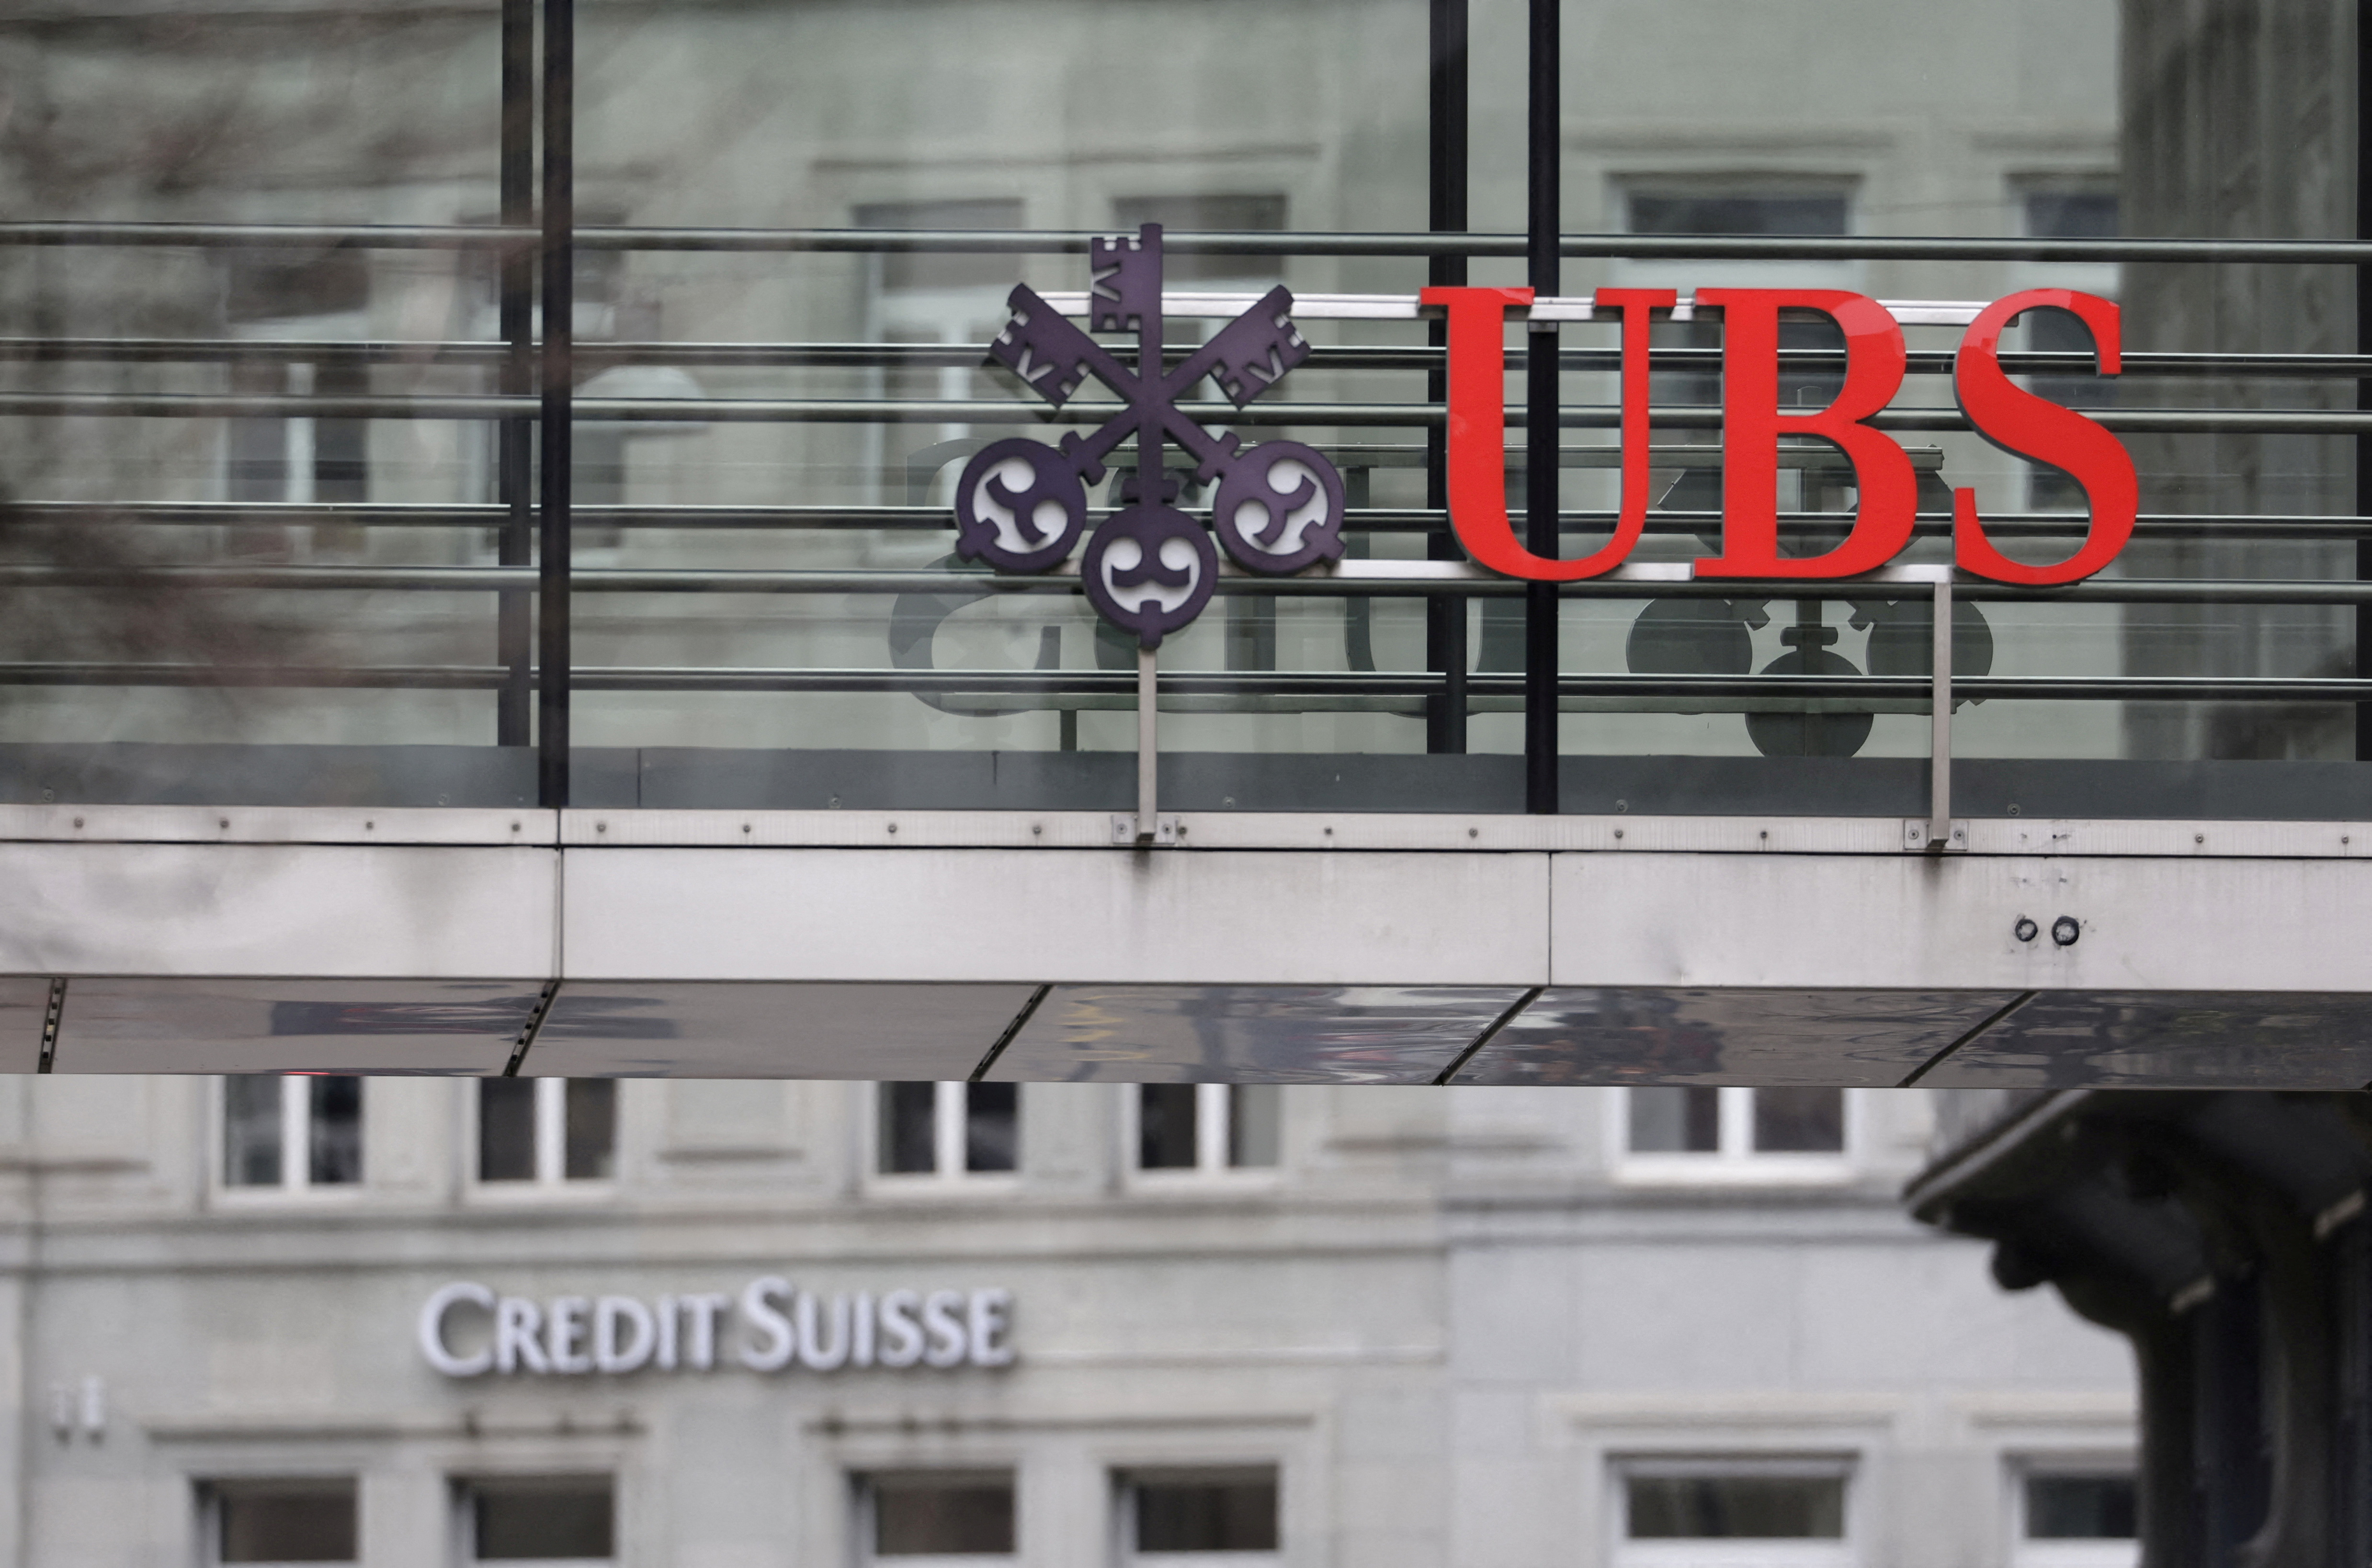 UBS agreed to purchase Credit Suisse for USD 3,230 million (REUTERS)